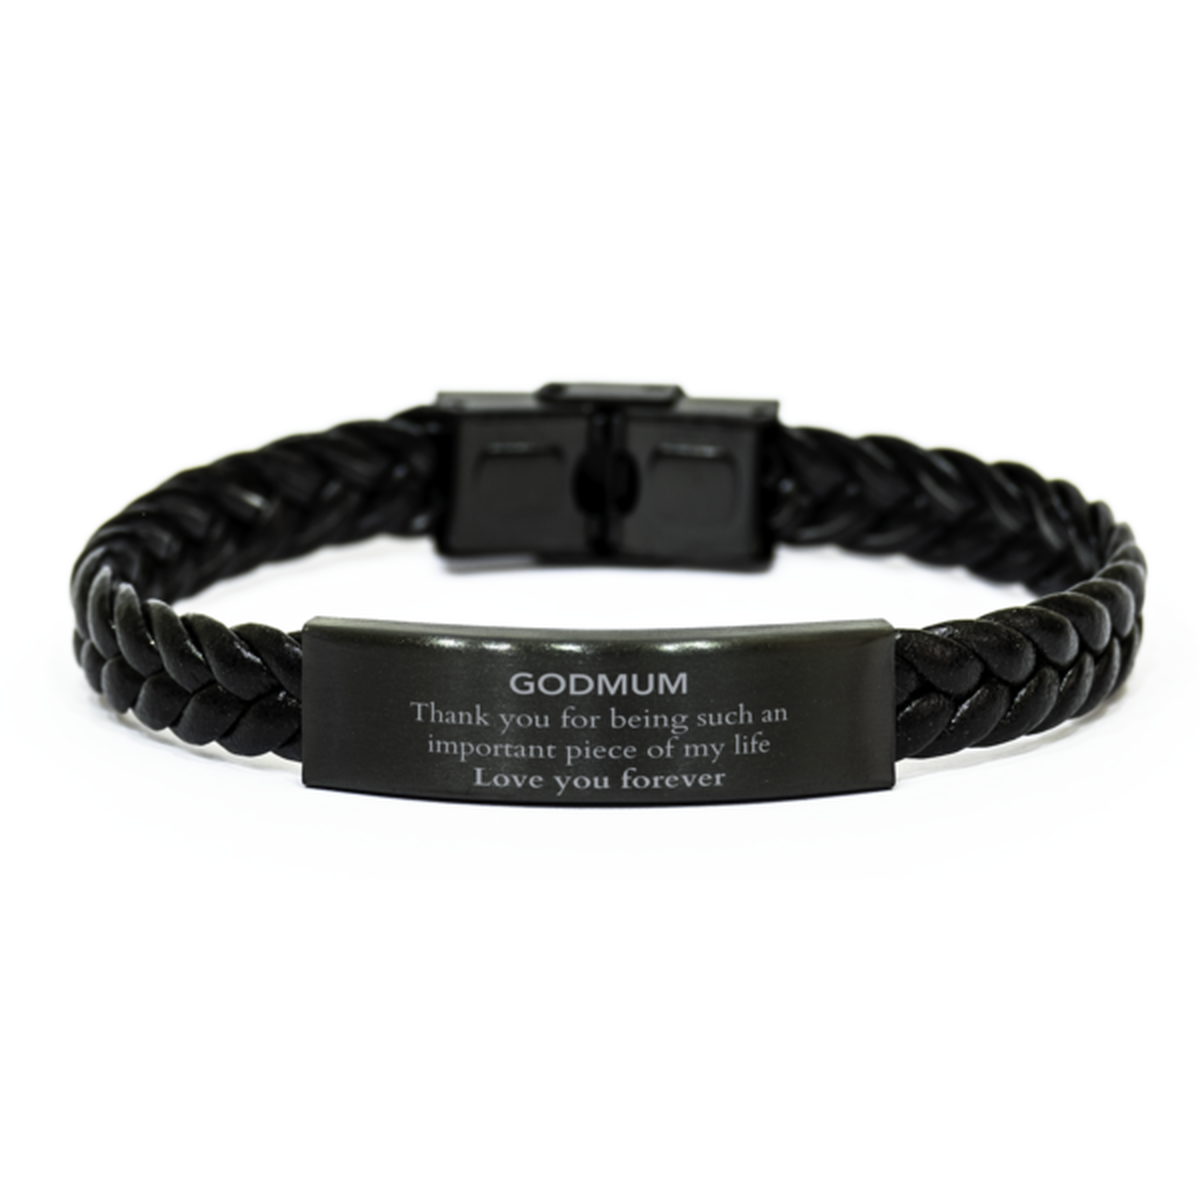 Appropriate Godmum Braided Leather Bracelet Epic Birthday Gifts for Godmum Thank you for being such an important piece of my life Godmum Christmas Mothers Fathers Day